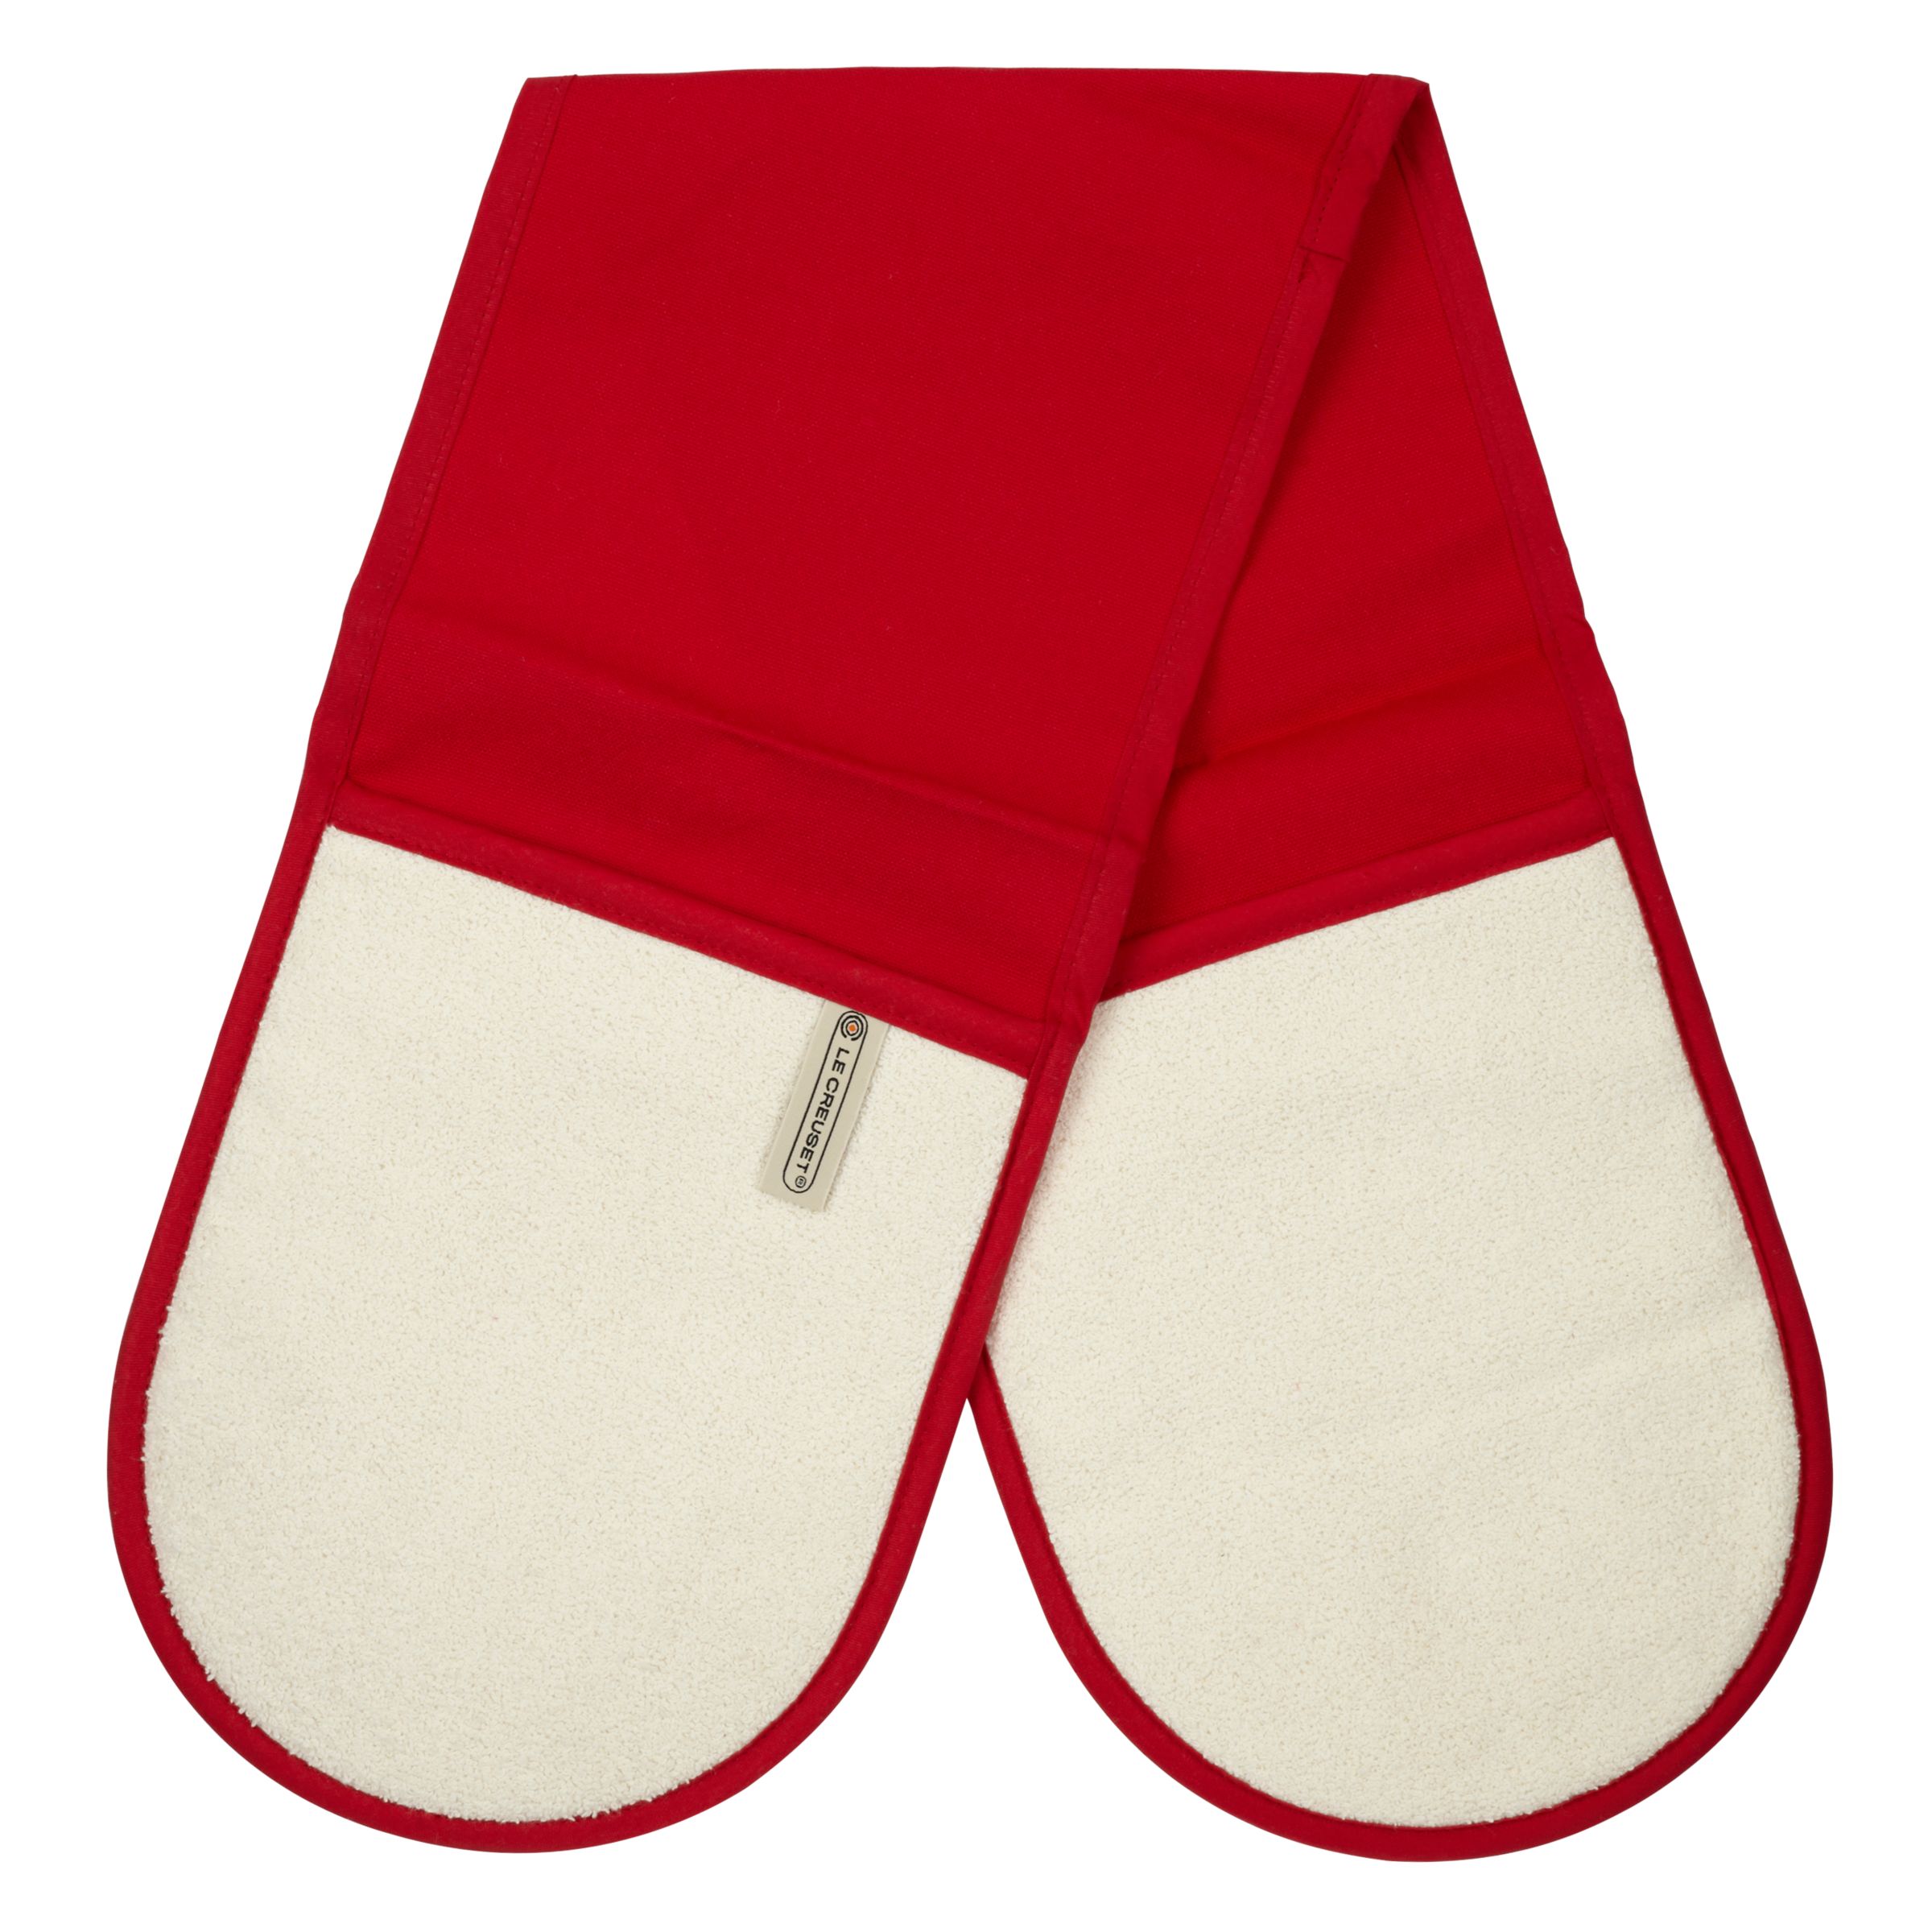 Le Creuset Oven glove